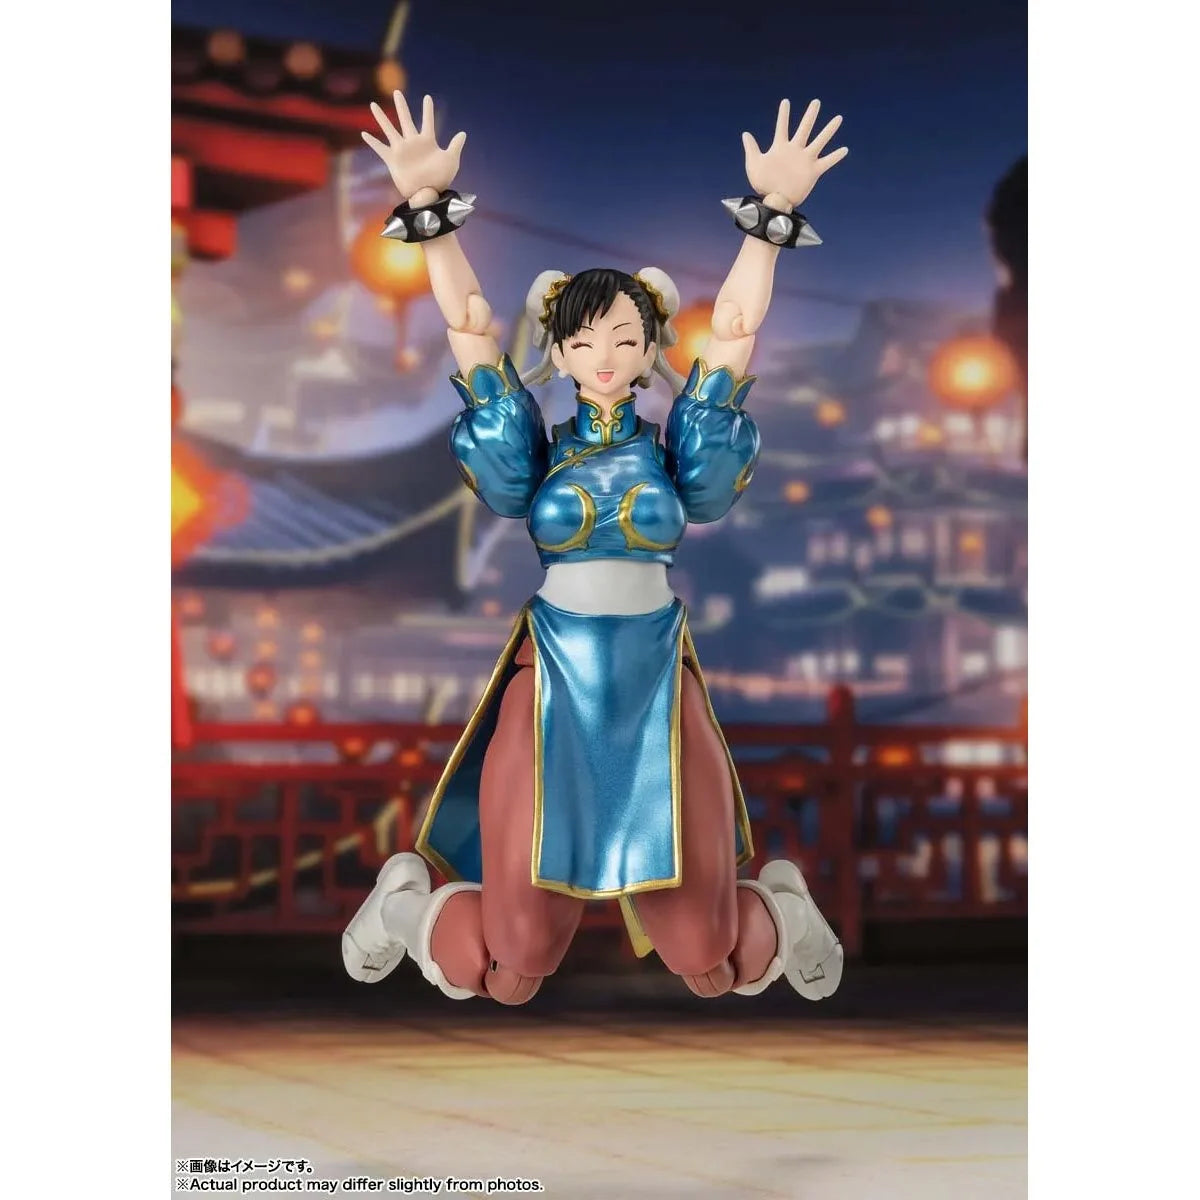 Street Fighter - Chun-Li - Outfit 2 - S.H.Figuarts Action Figure